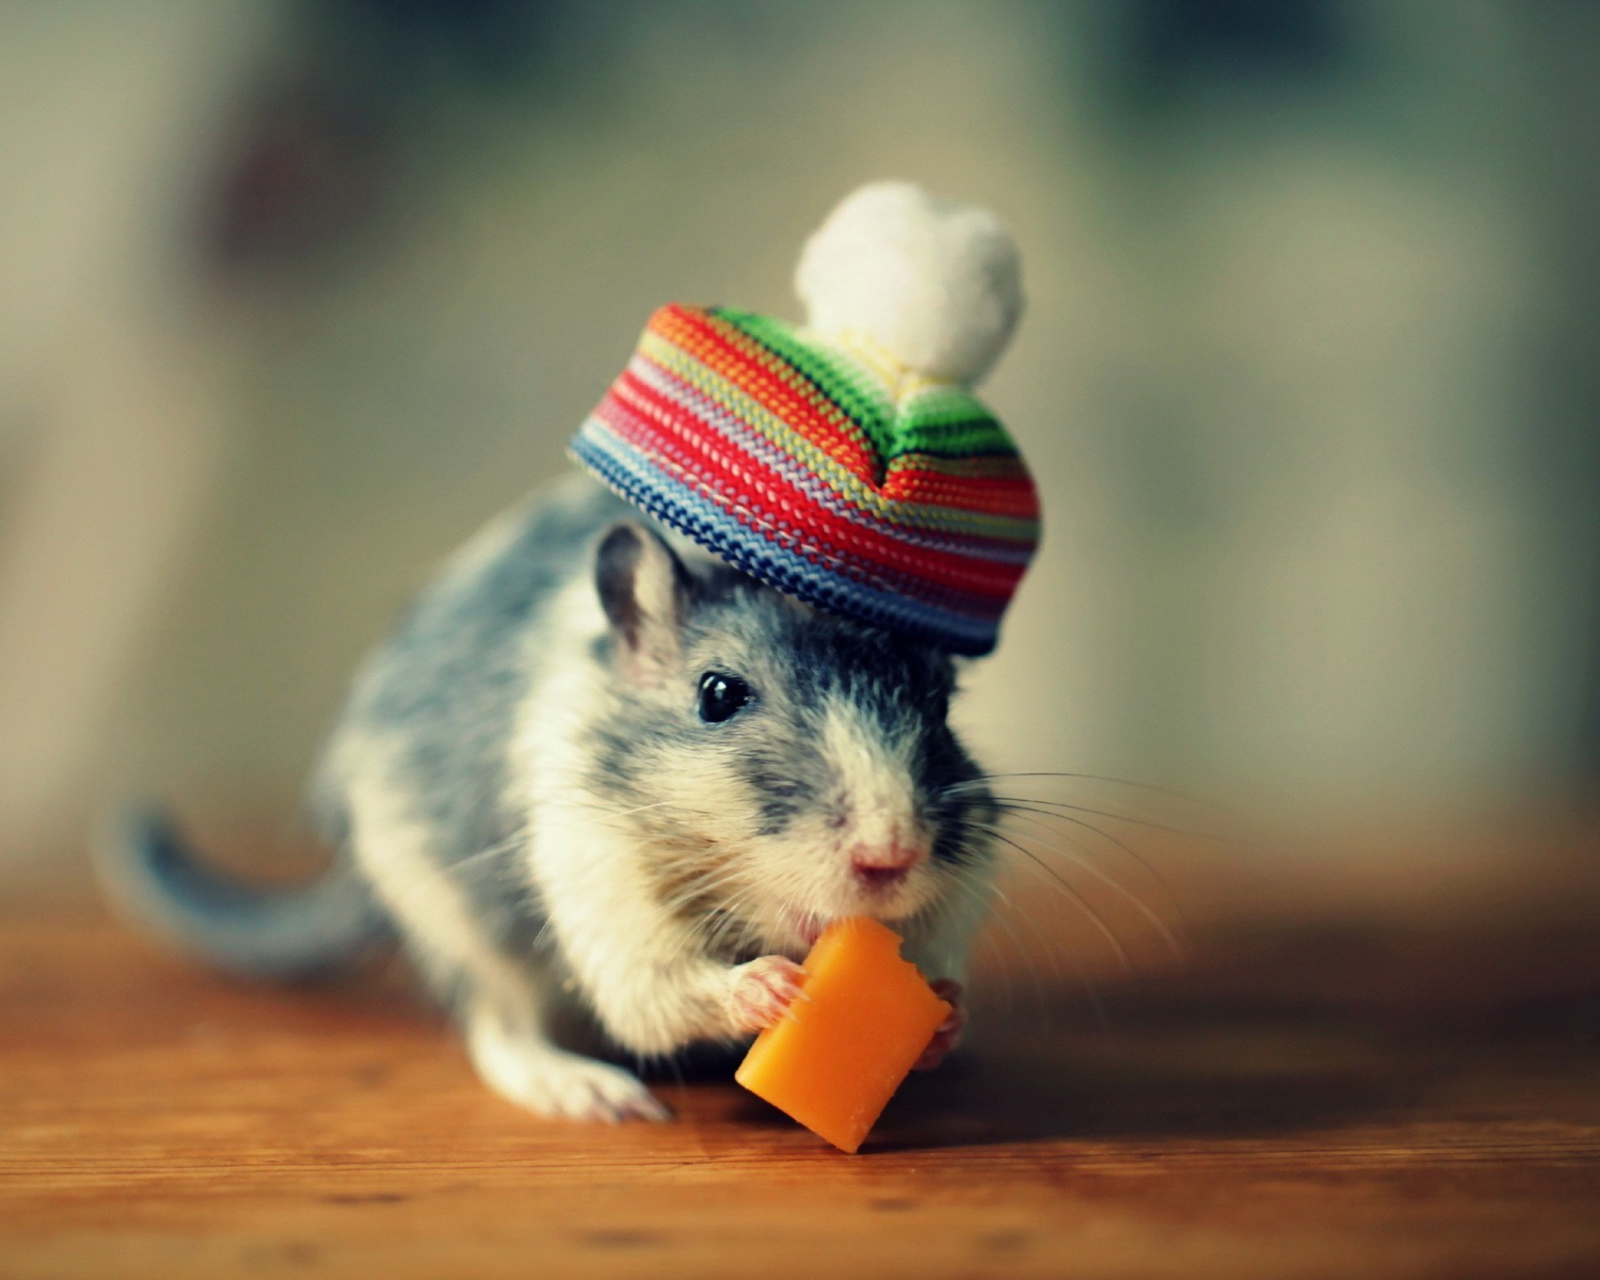 Das Mouse In Funny Little Hat Eating Cheese Wallpaper 1600x1280